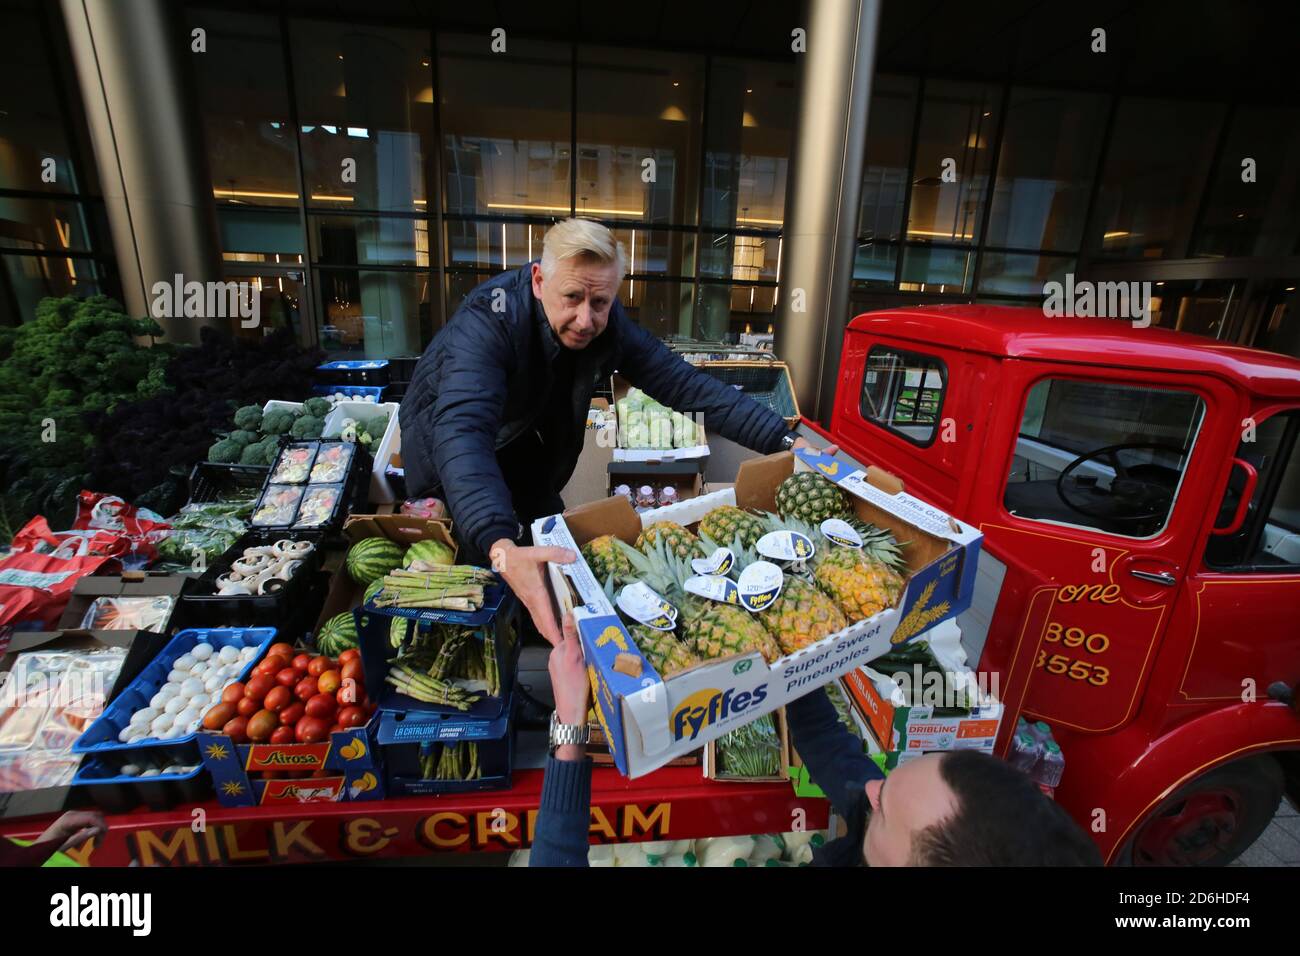 16OCT 2020: BELFAST, CO.ANTRIM: Brian Townley hands out boxs of fresh produce which was being sold either as a donation or below 50% of normal price outside a Belfast Hotel as Northern Ireland prepares to lock down as from 18:00 BST on Friday as Northern Ireland is put under stricter Covid-19 restrictions.On Thursday the Finance Minister Conor Murphy announced hotels will be able to apply to a scheme designed to help businesses forced to shut. The additional financial support comes after new restrictions were announced in a bid to stem cases of Covid-19. Photo/Paul McErlane Stock Photo